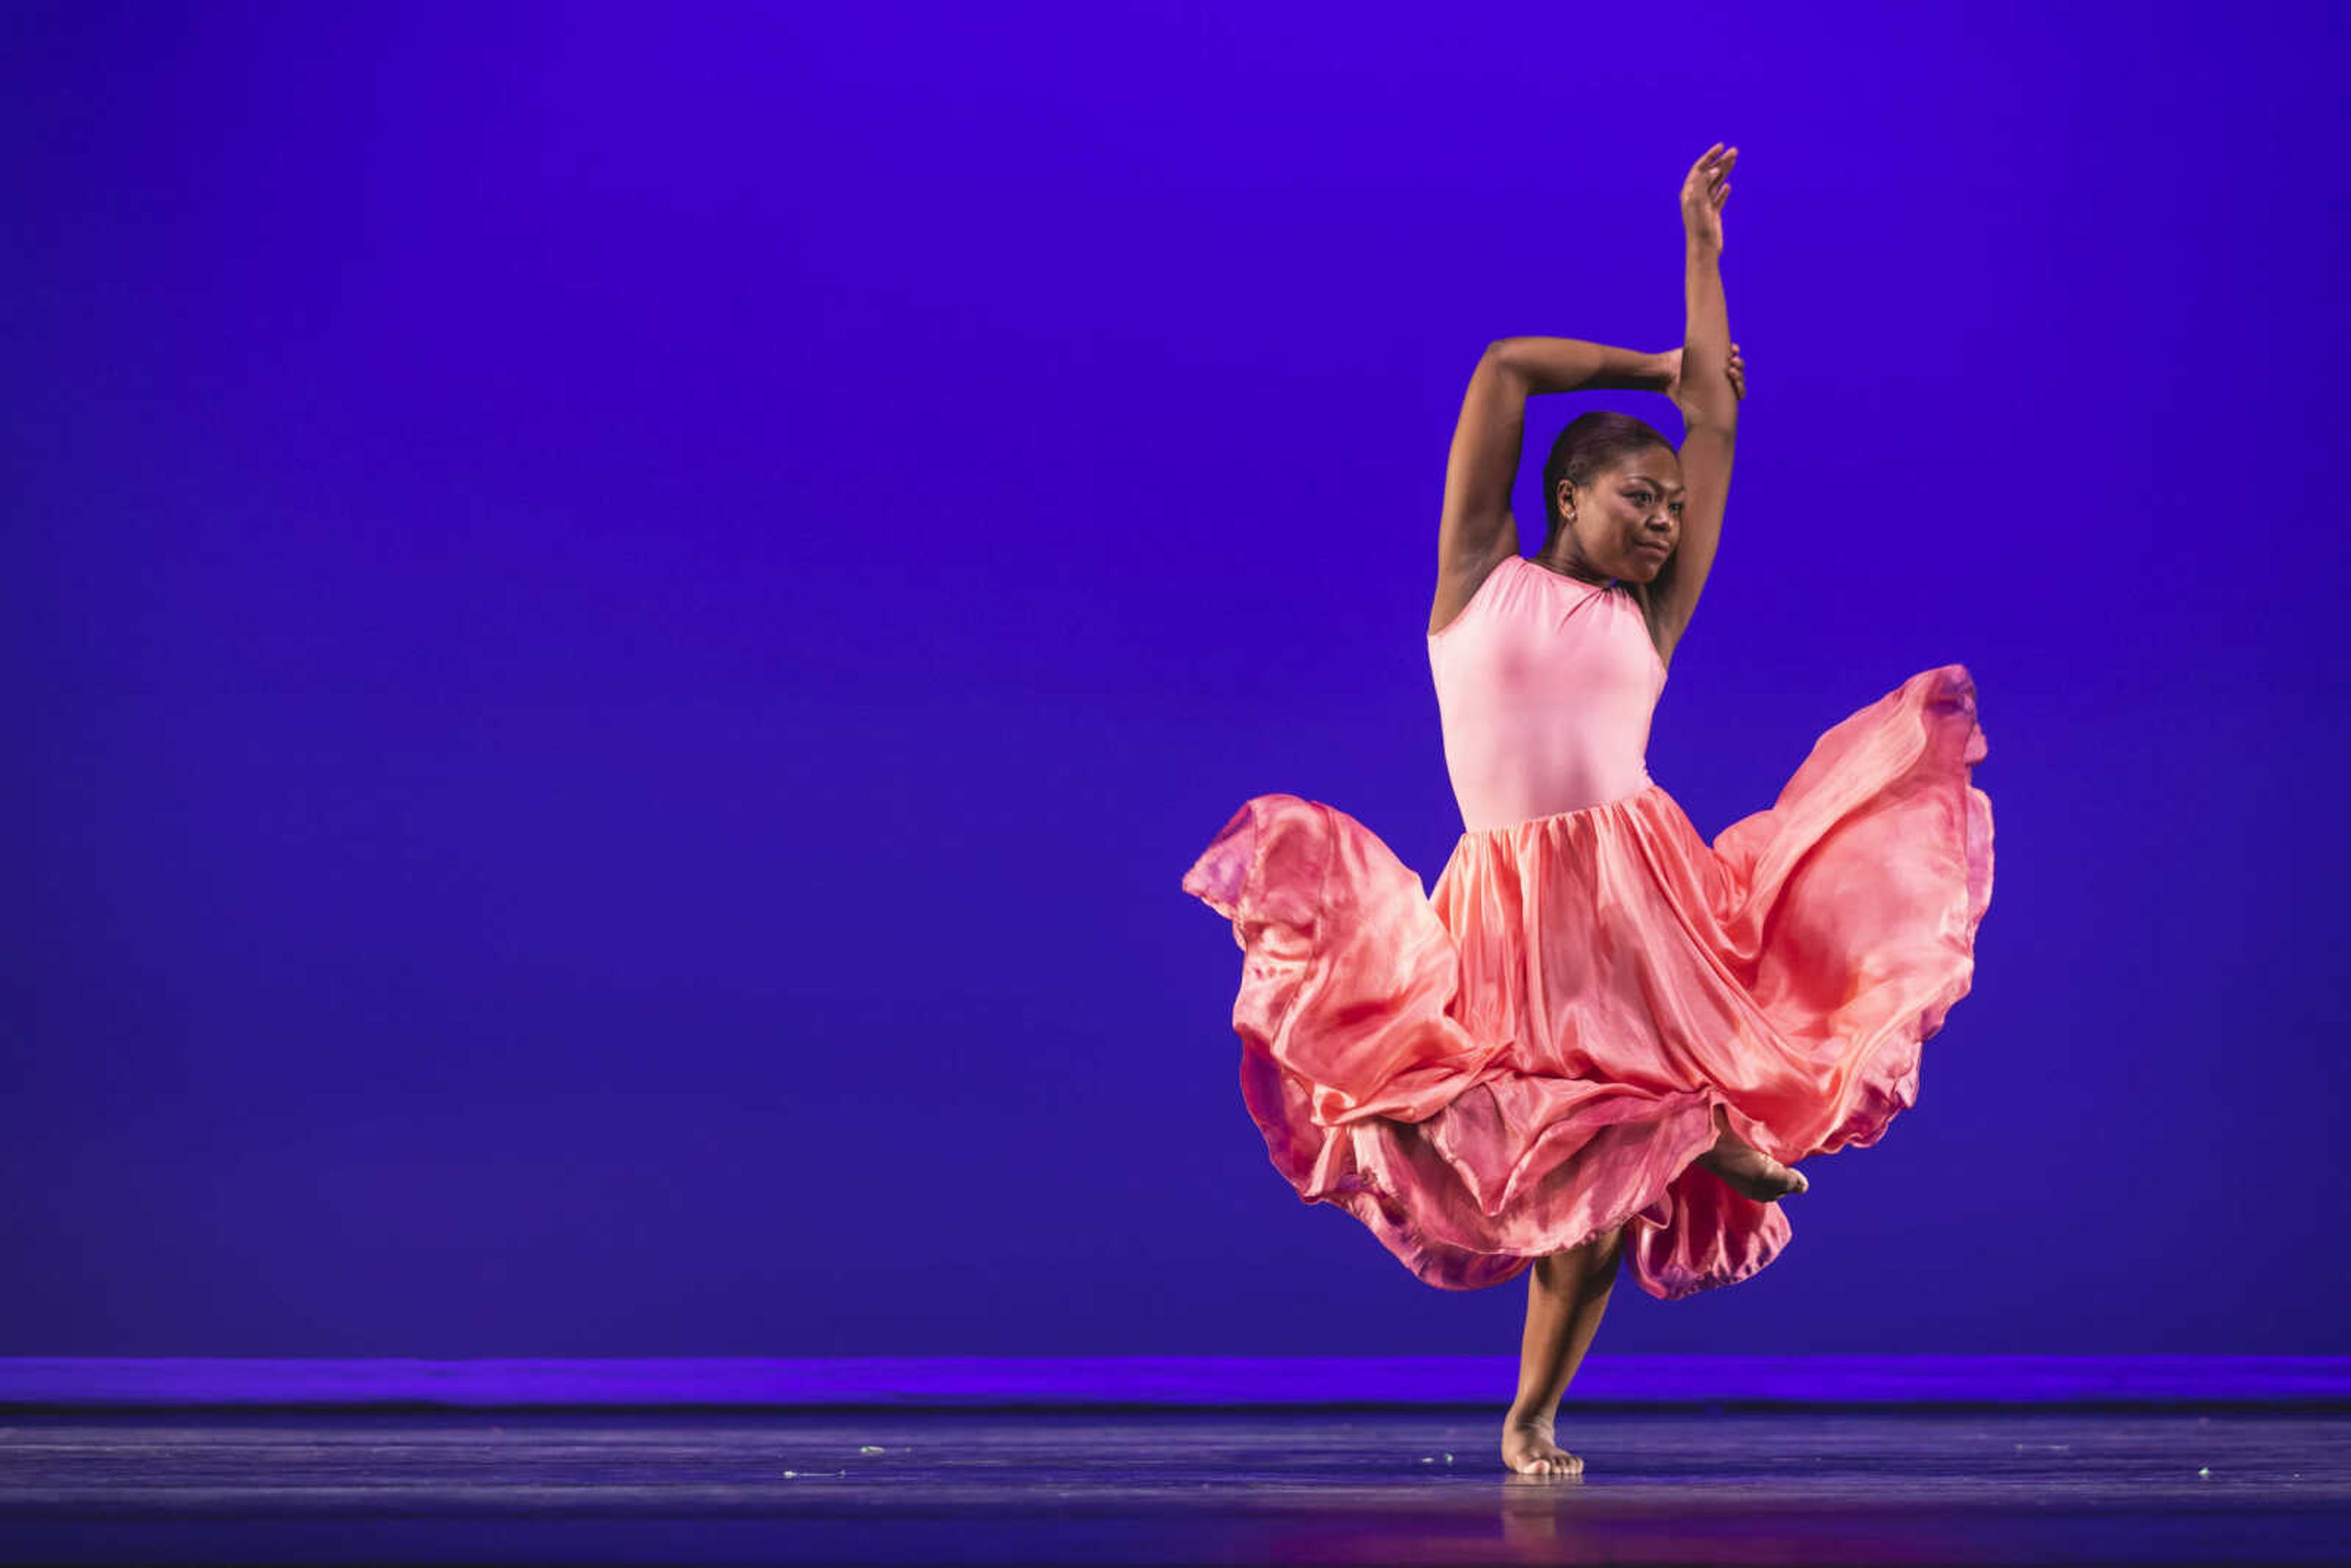 Southeast River Campus brings diverse music to the annual Fall for Dance